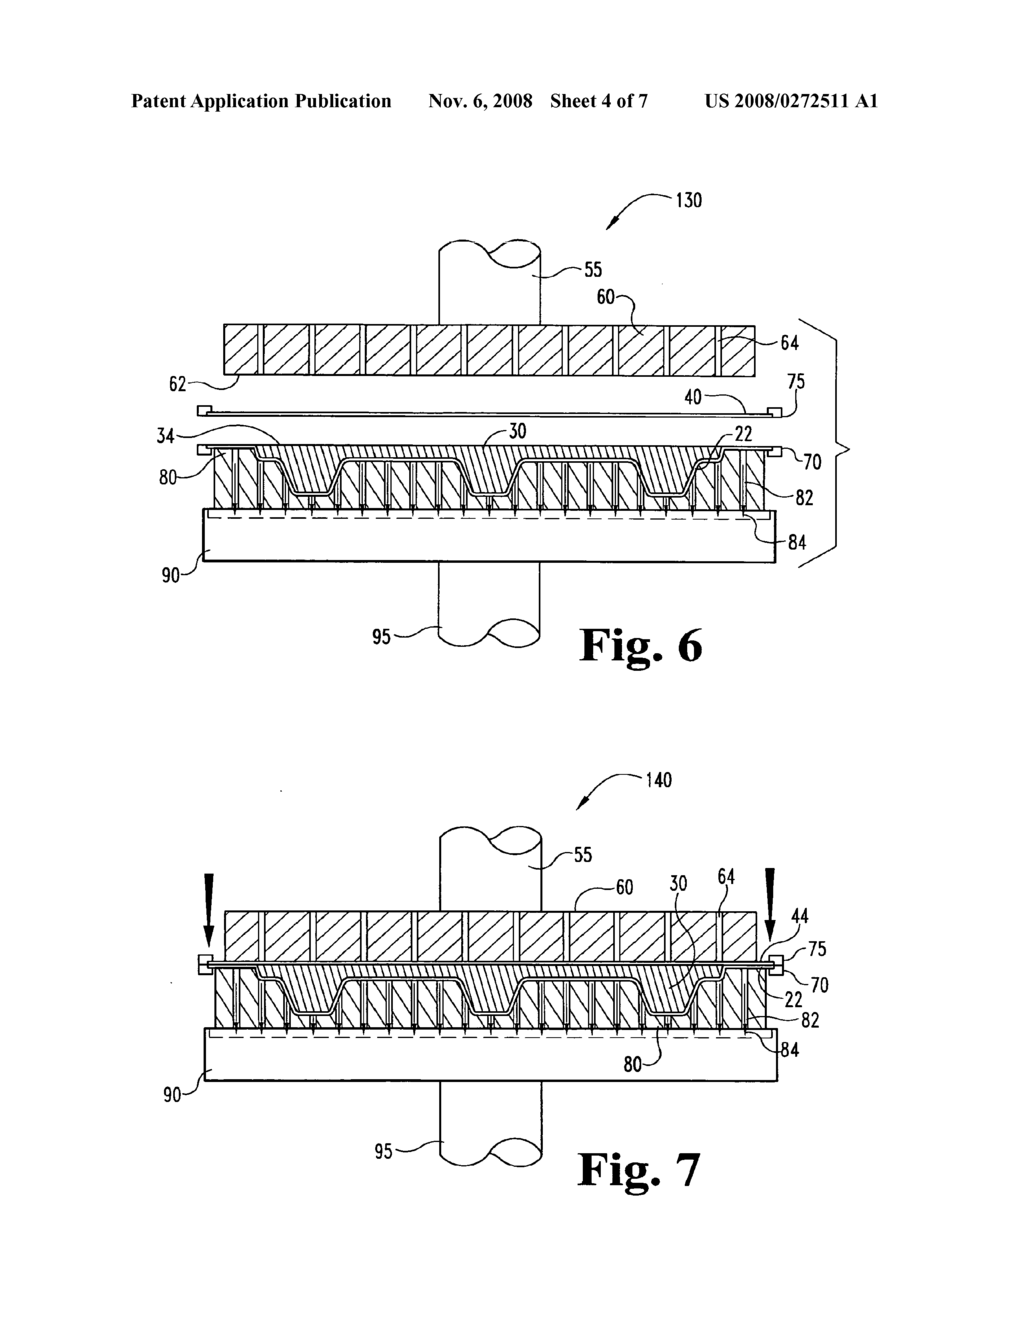 METHOD OF MOLDING LOAD-BEARING ARTICLES FROM COMPRESSIBLE CORES AND HEAT MALLEABLE COVERINGS - diagram, schematic, and image 05